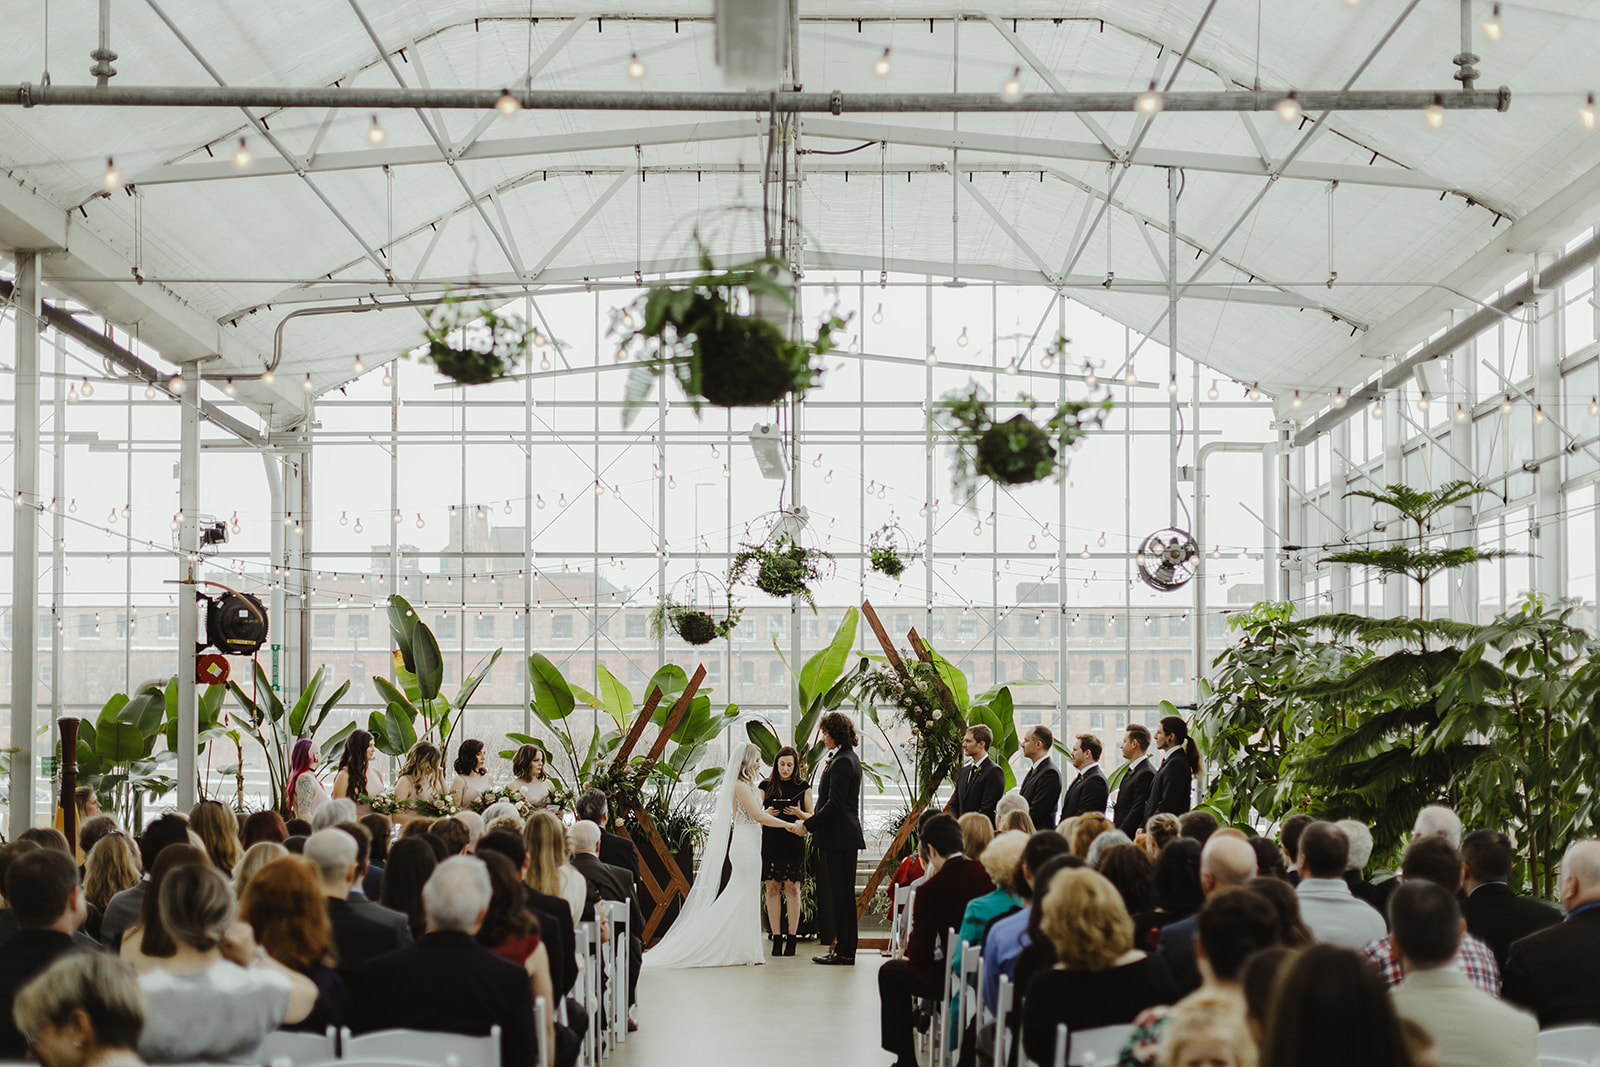 A wedding ceremony at the Grand Rapids Downtown Market